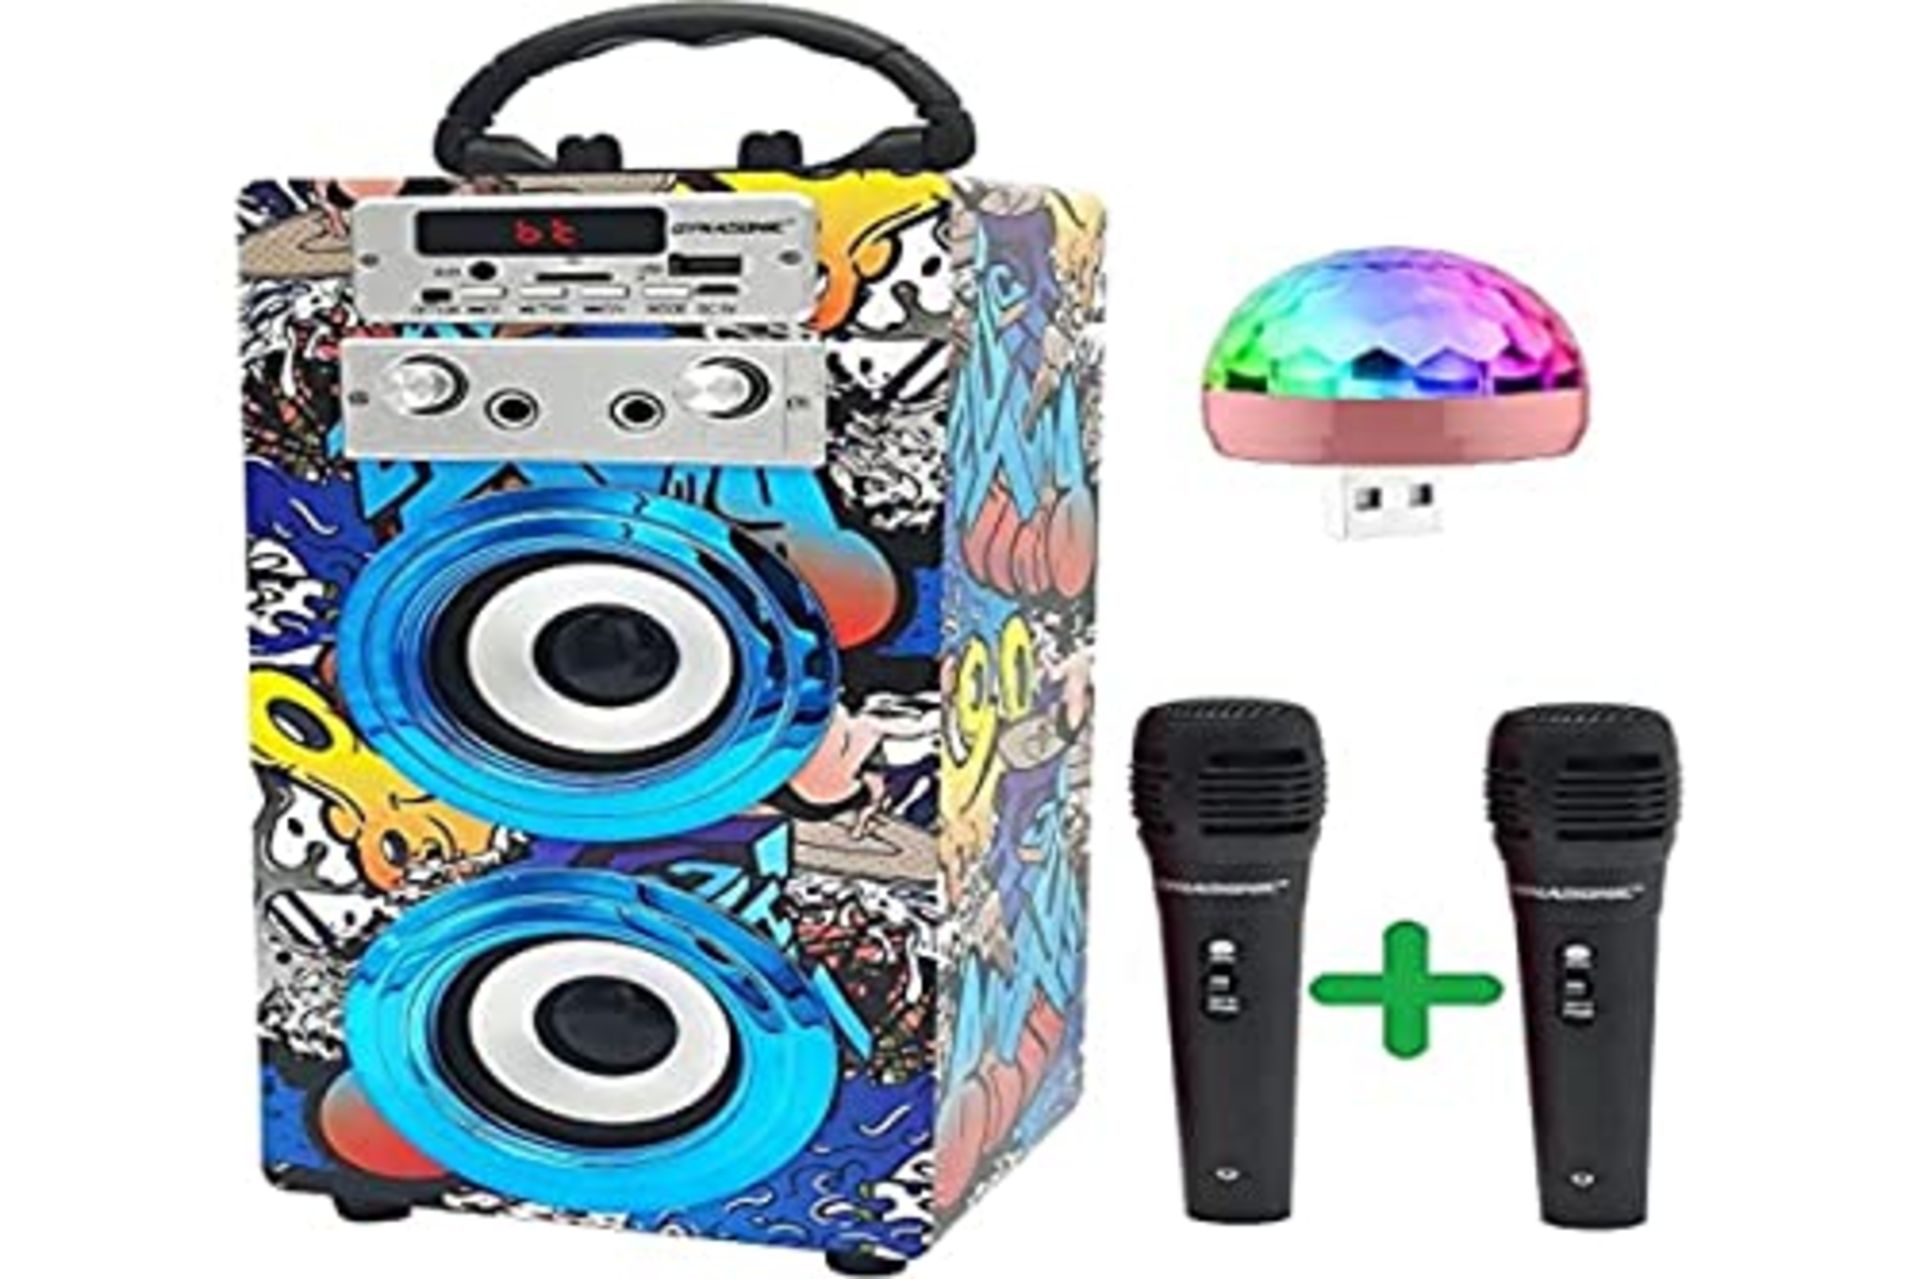 DYNASONIC 3rd generation Karaoke model with Microphone, Original Gifts for Children, T